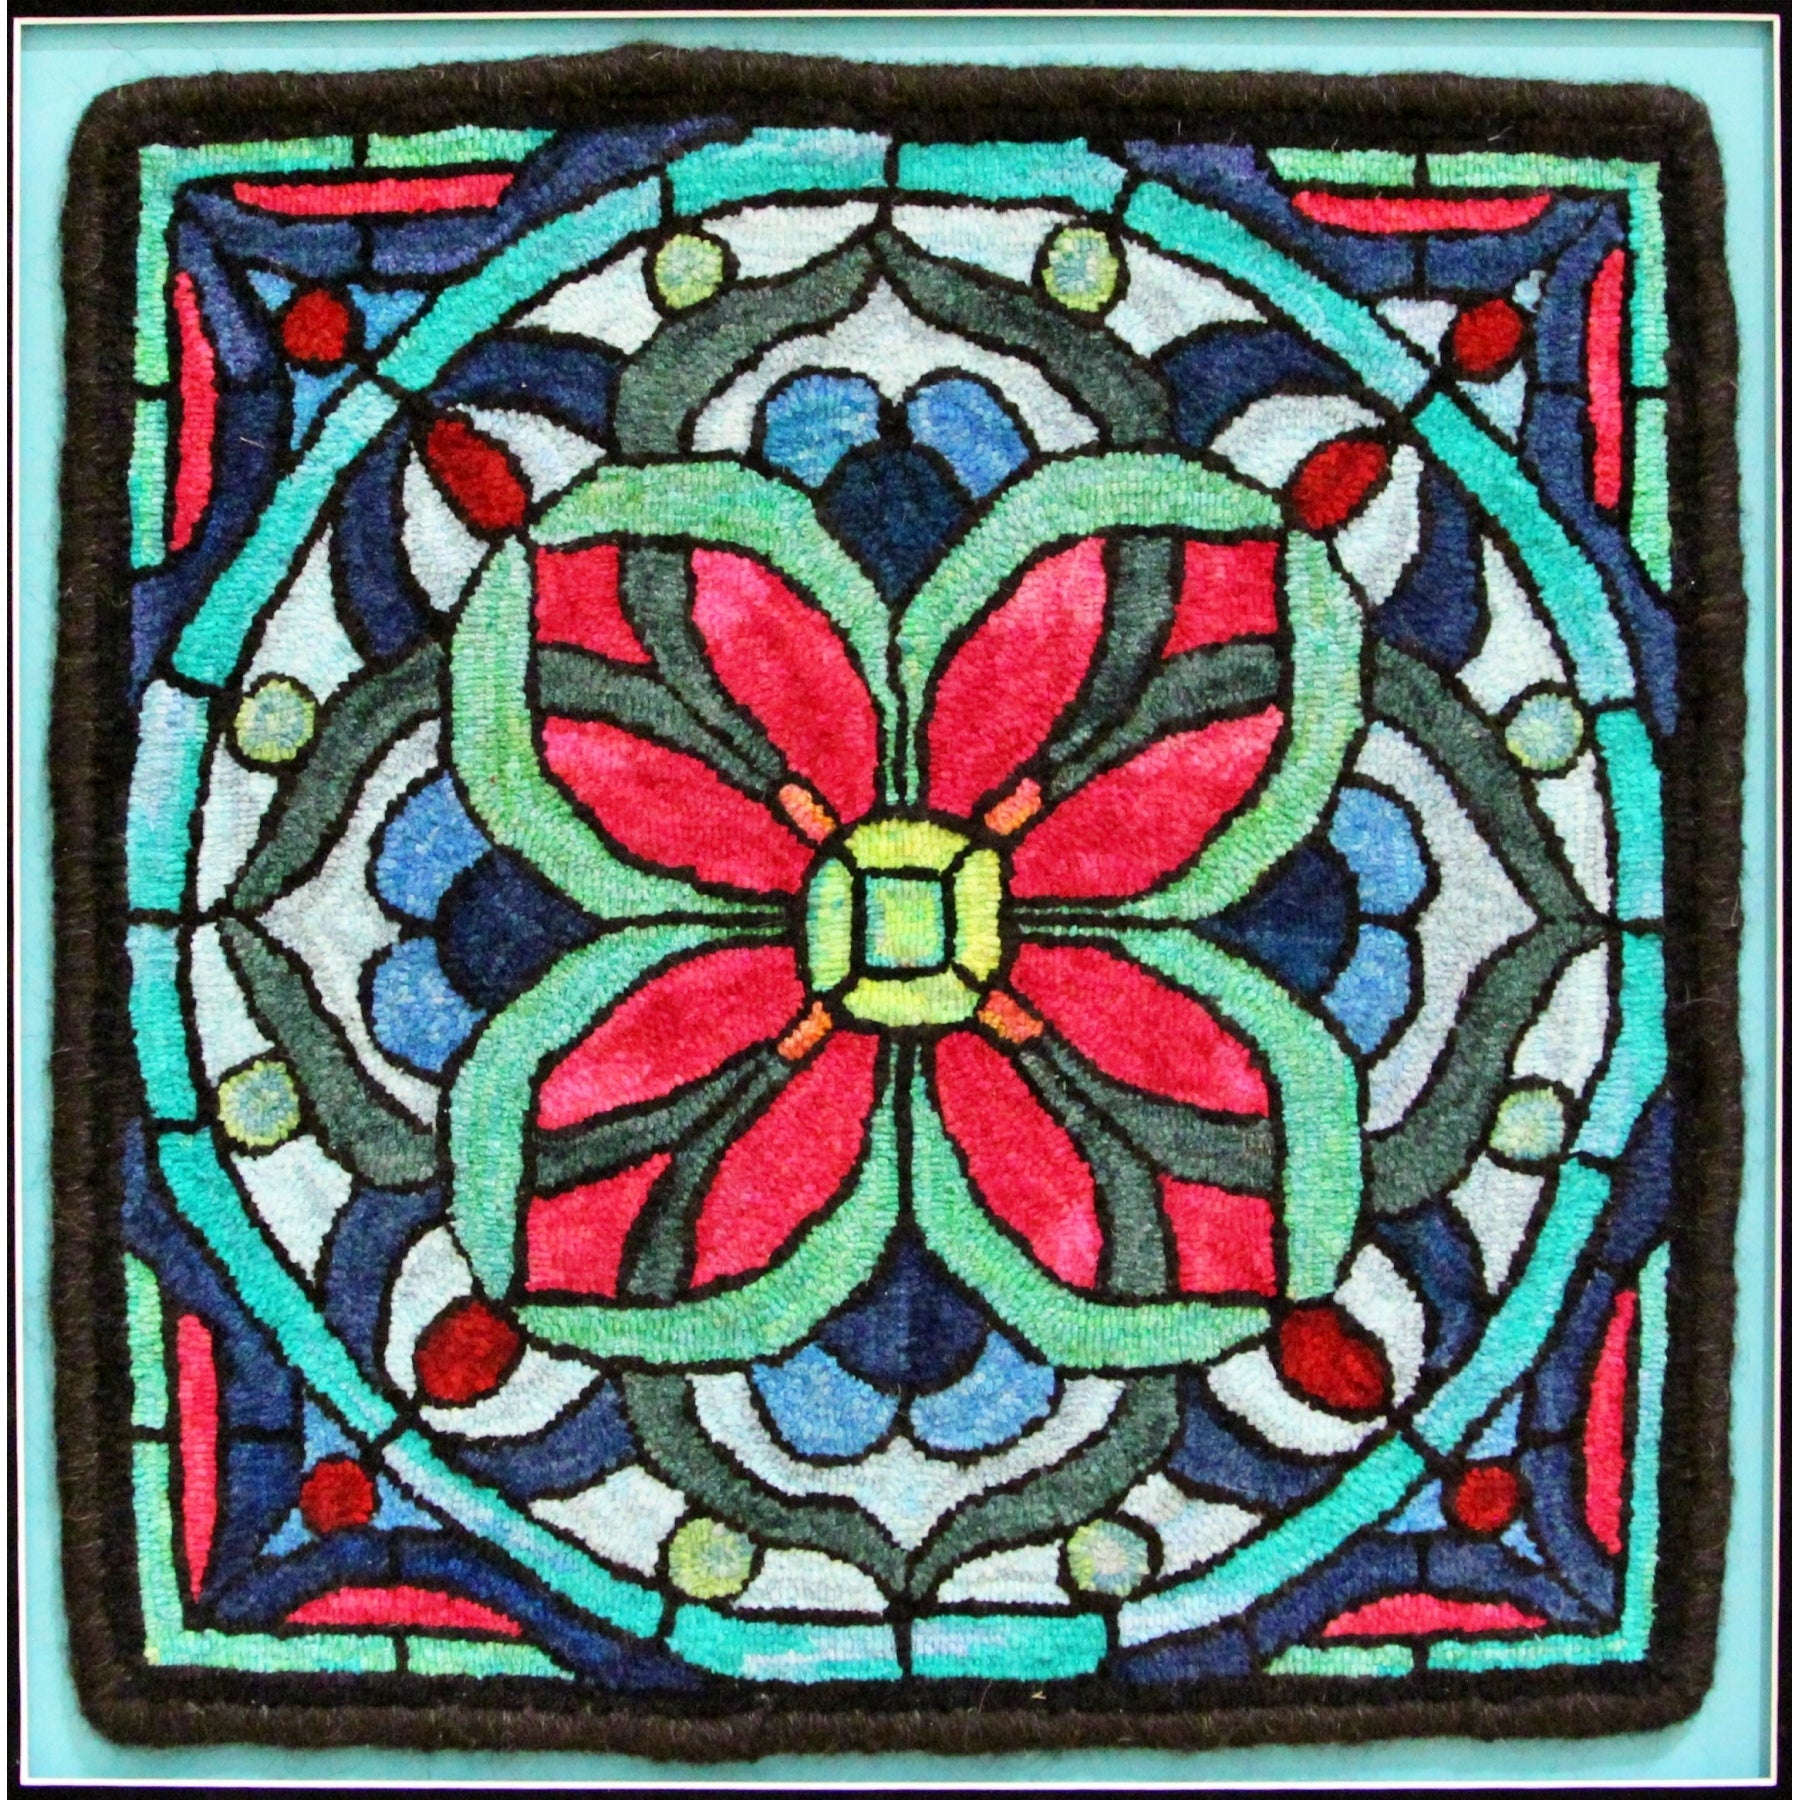 Stained Glass Mosaic, rug hooked by Pat Levin